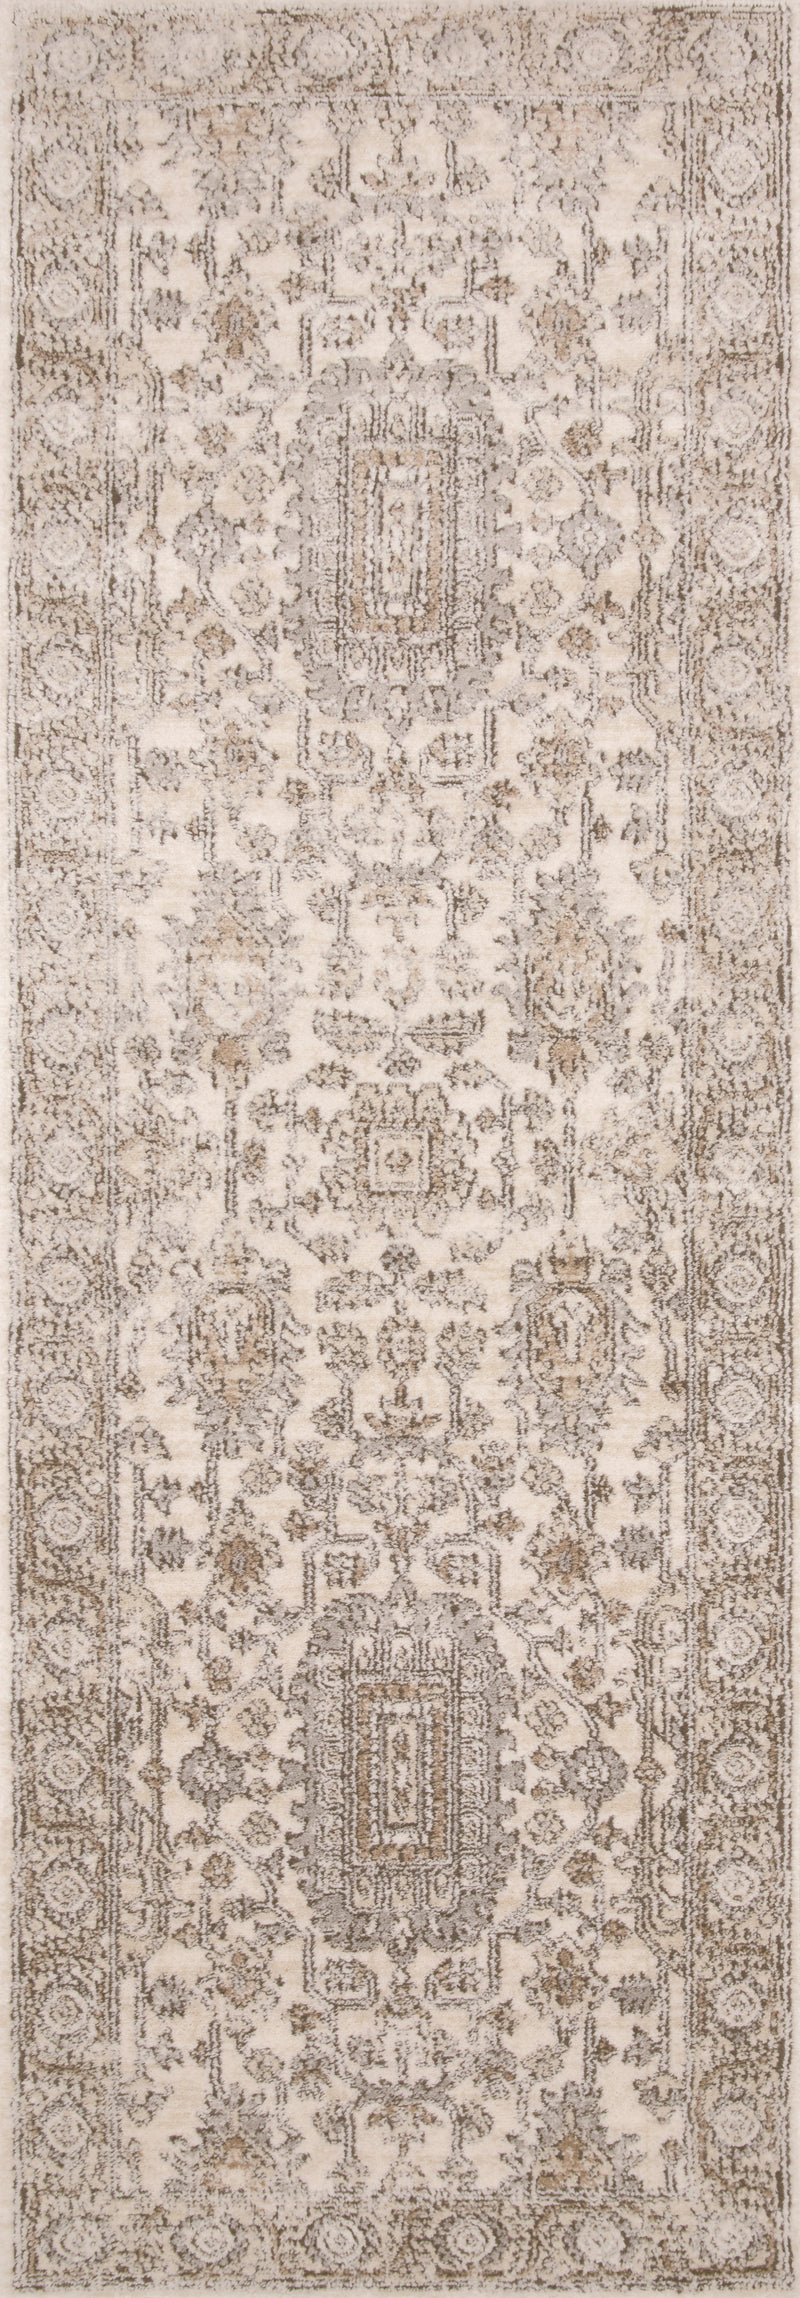 media image for Teagan Rug in Ivory / Sand by Loloi II 261